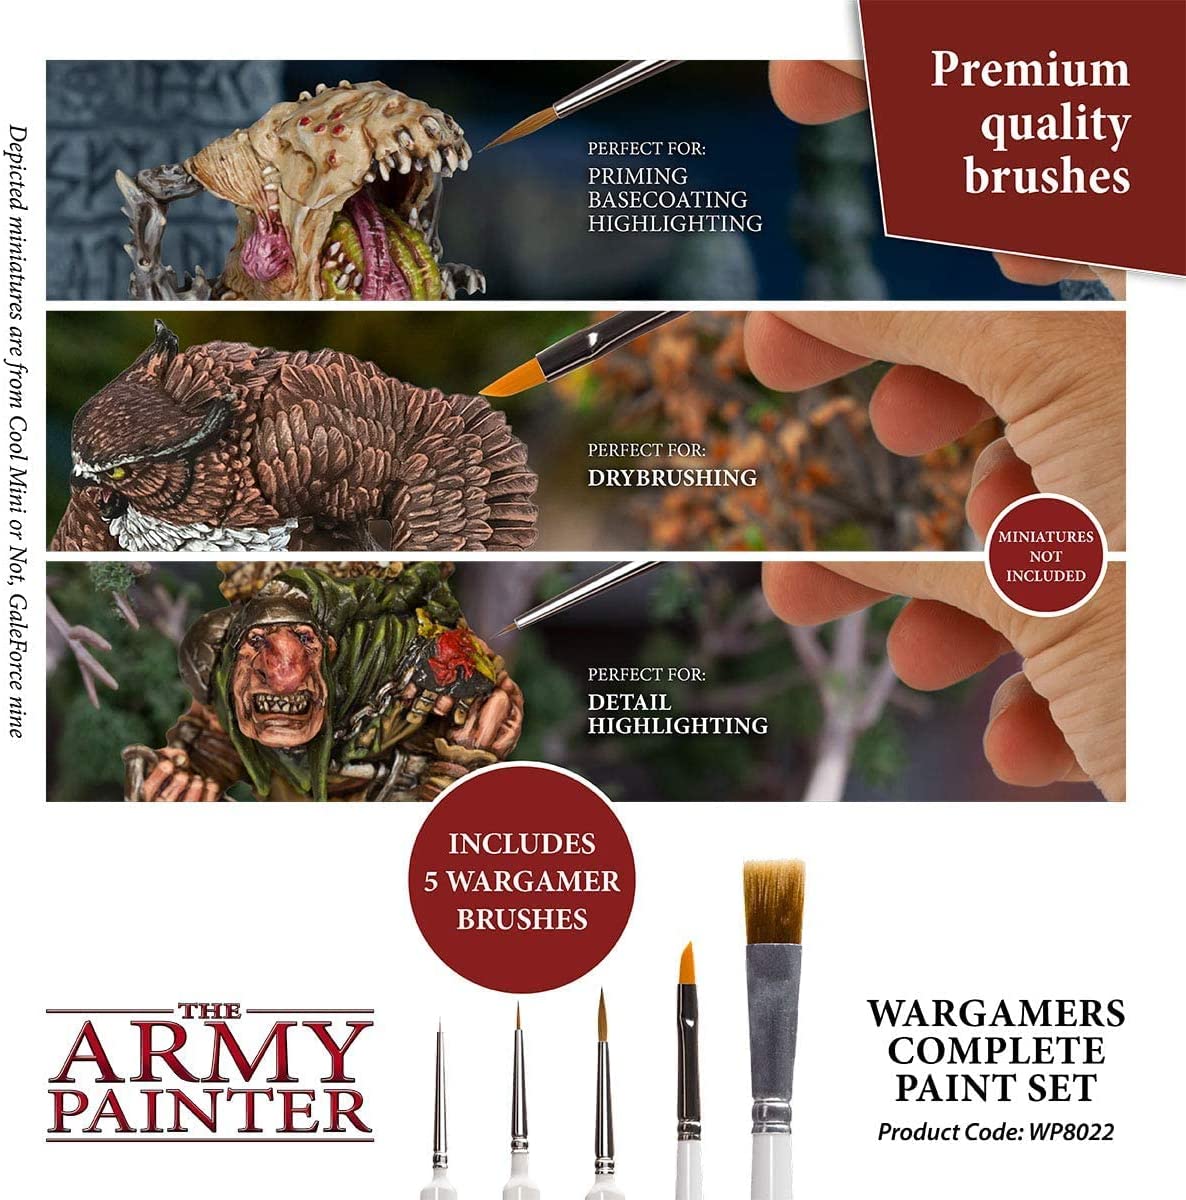 The Army Painter. Wargamers Complete Paint Set examples